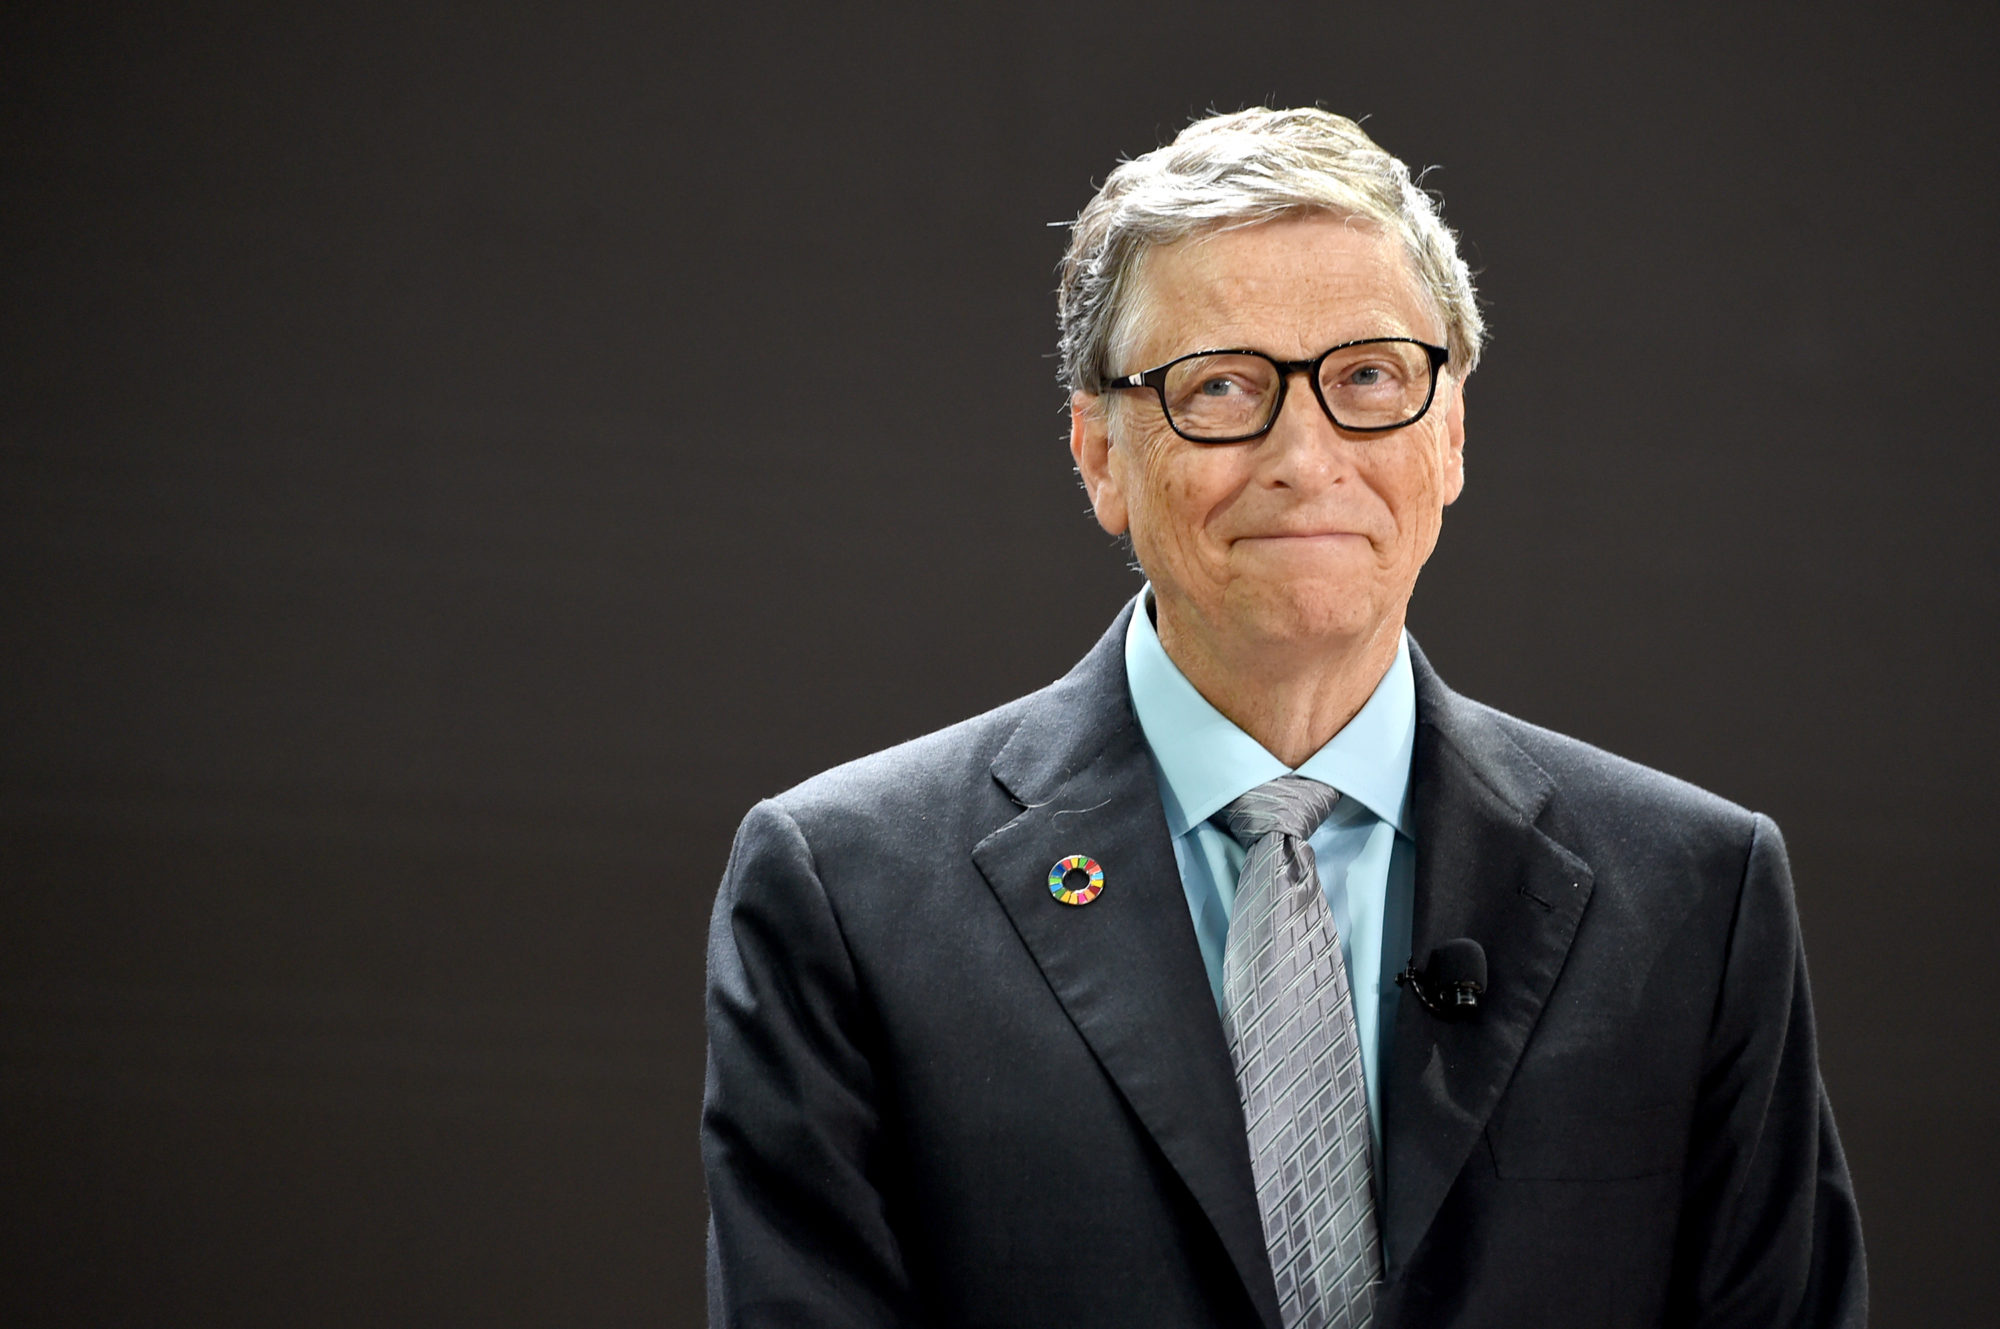 Art Industry News: NFT Skeptic Bill Gates Will NOT Be Buying Any 'Expensive Digital Images of Monkeys,' Thanks Very Much + Other Stories | Artnet News